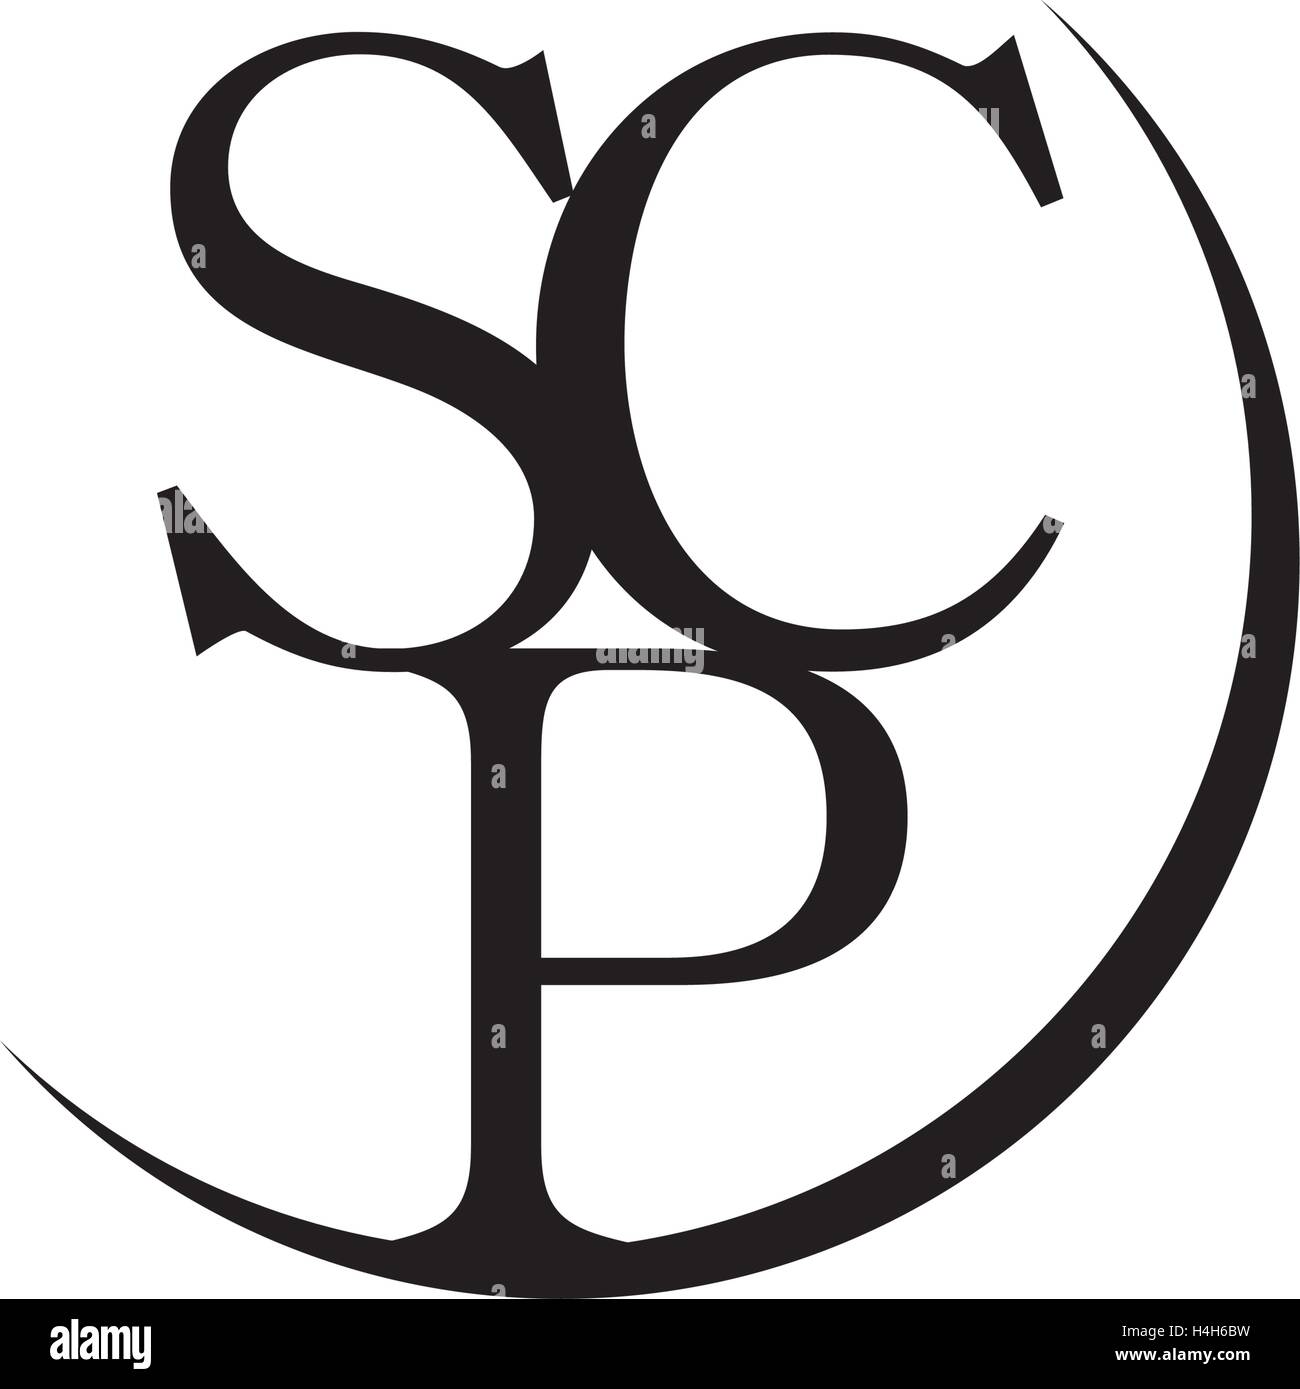 SCP Letter Initial Logo Design Vector Illustration Royalty Free SVG,  Cliparts, Vectors, and Stock Illustration. Image 178510757.